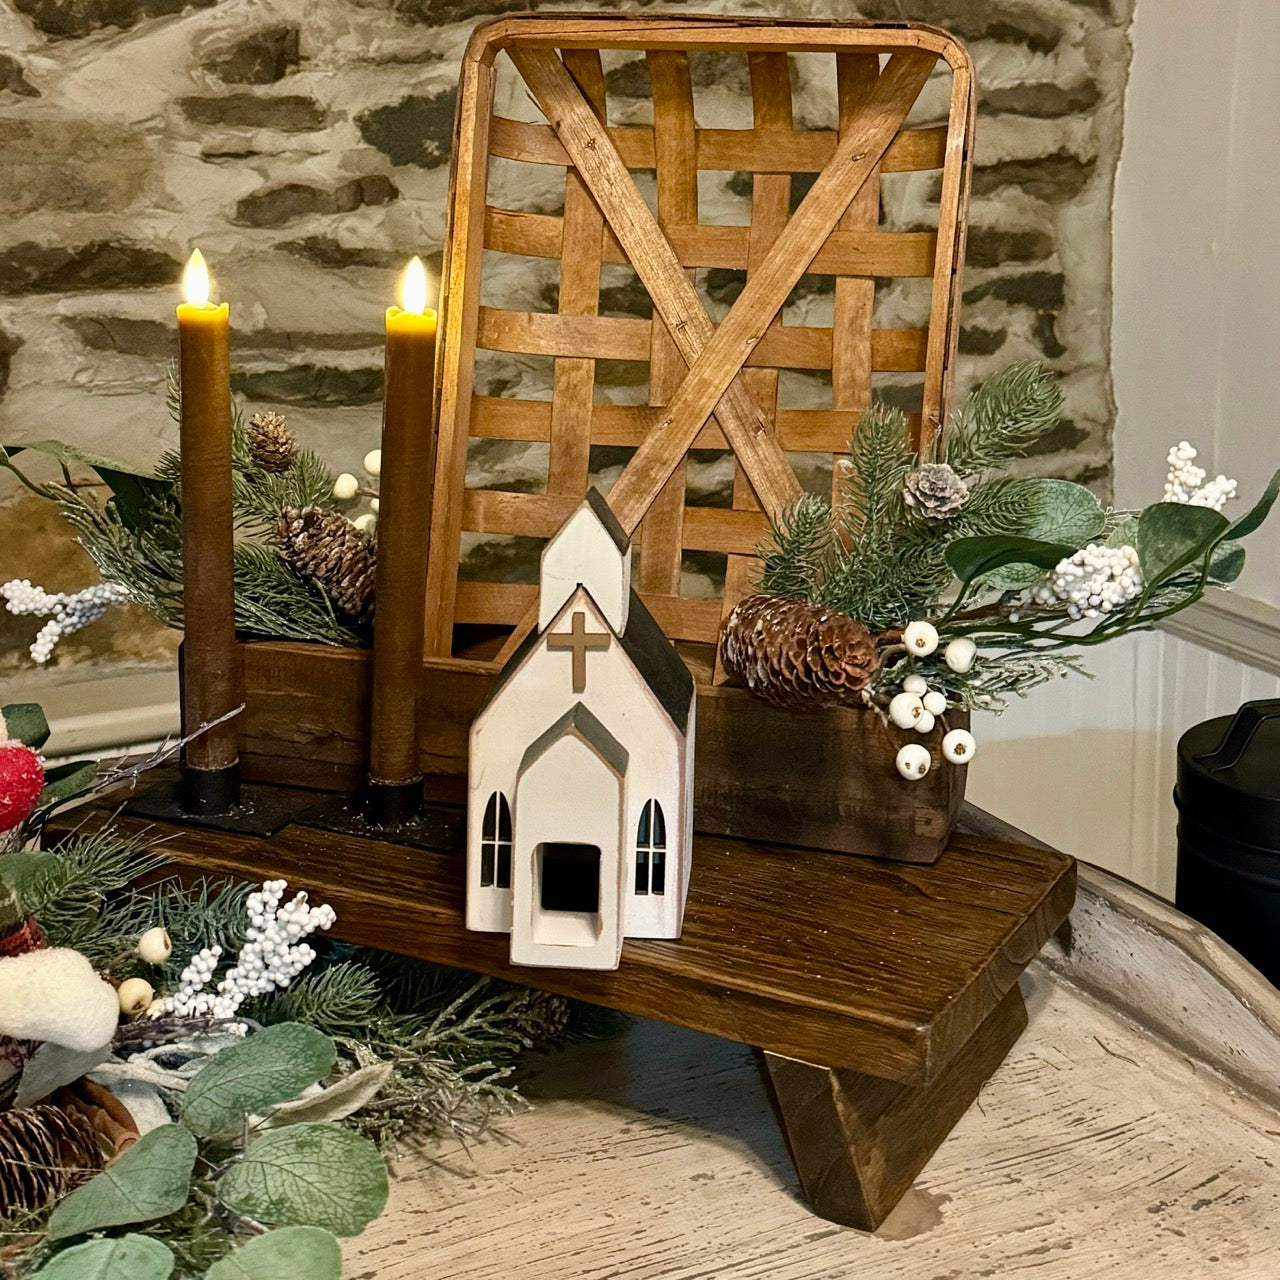 Rustic Brown Table Riser - FREE Gift Included - Limited Time!